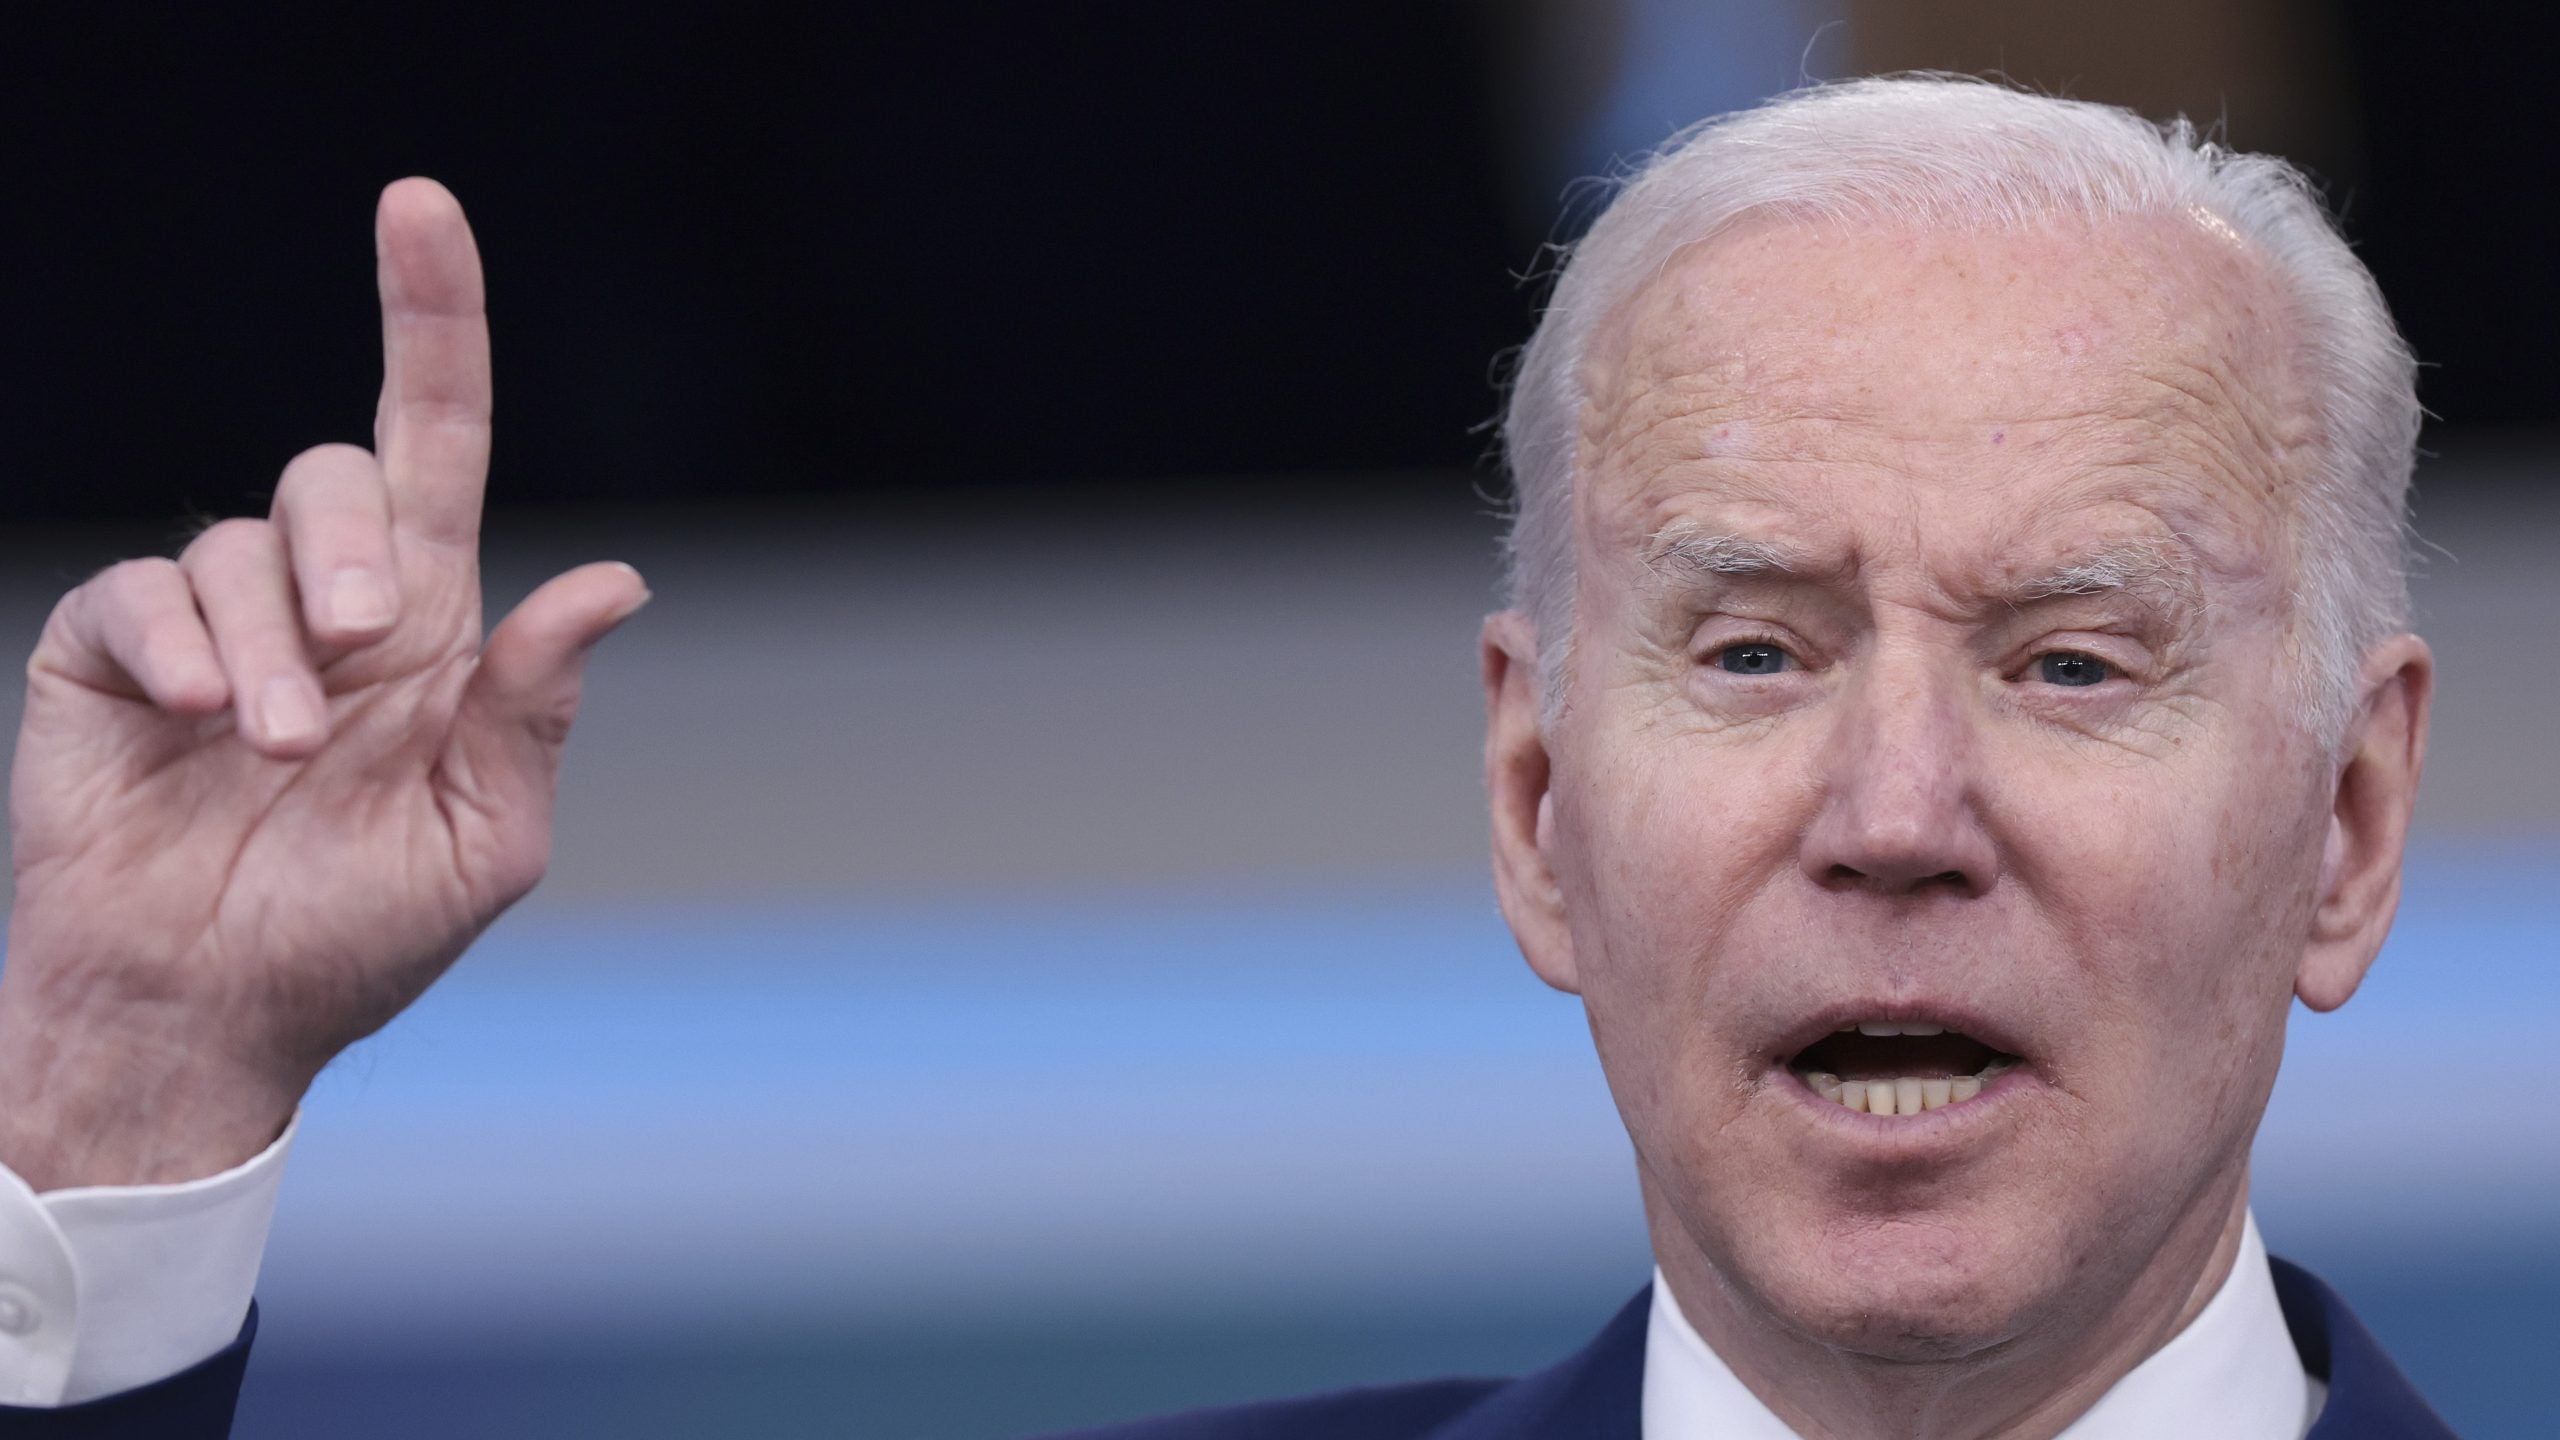 President Biden Urges Return To Office: 'Most Americans Can Remove Their Masks, Return To Work And Move Forward Safely'